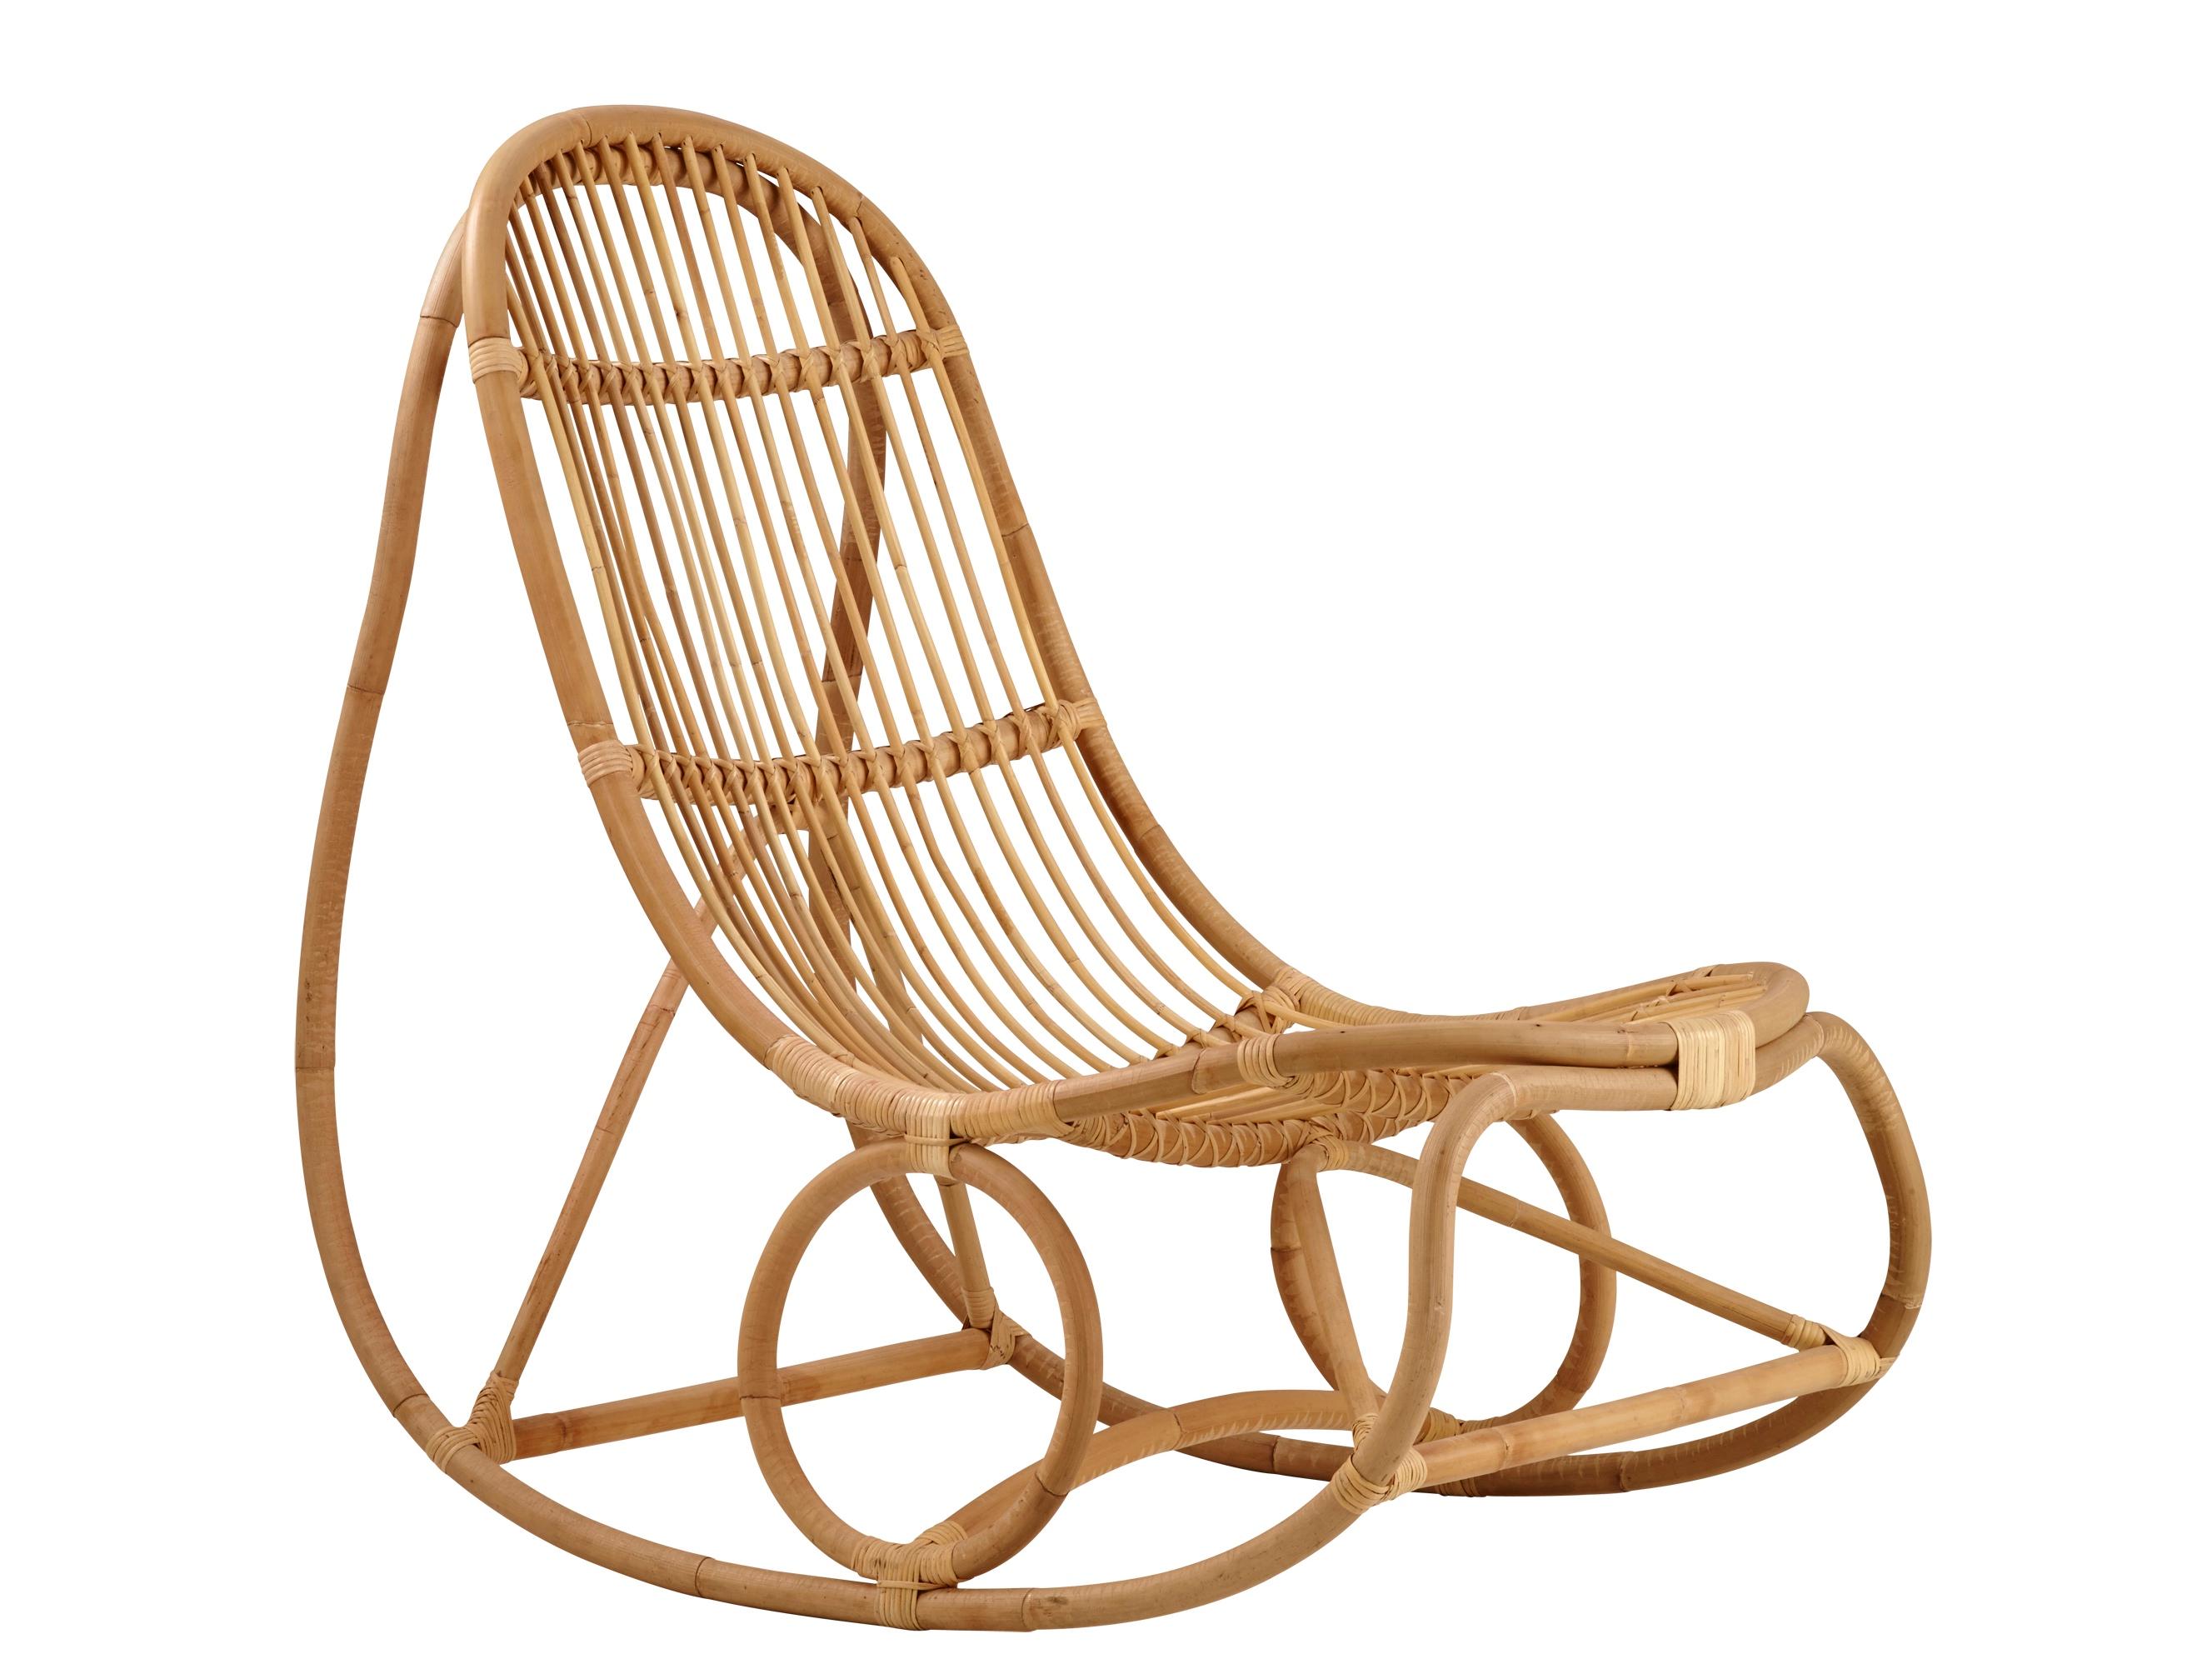 Scandinavian rocking chair model Nanny by Nanna Ditzel.
New edition. Nanna Ditzel trained as a cabinetmaker before studying at the School of Arts and Crafts and then at the Royal Academy of Fine Arts in Copenhagen. She left in 1946, and the same